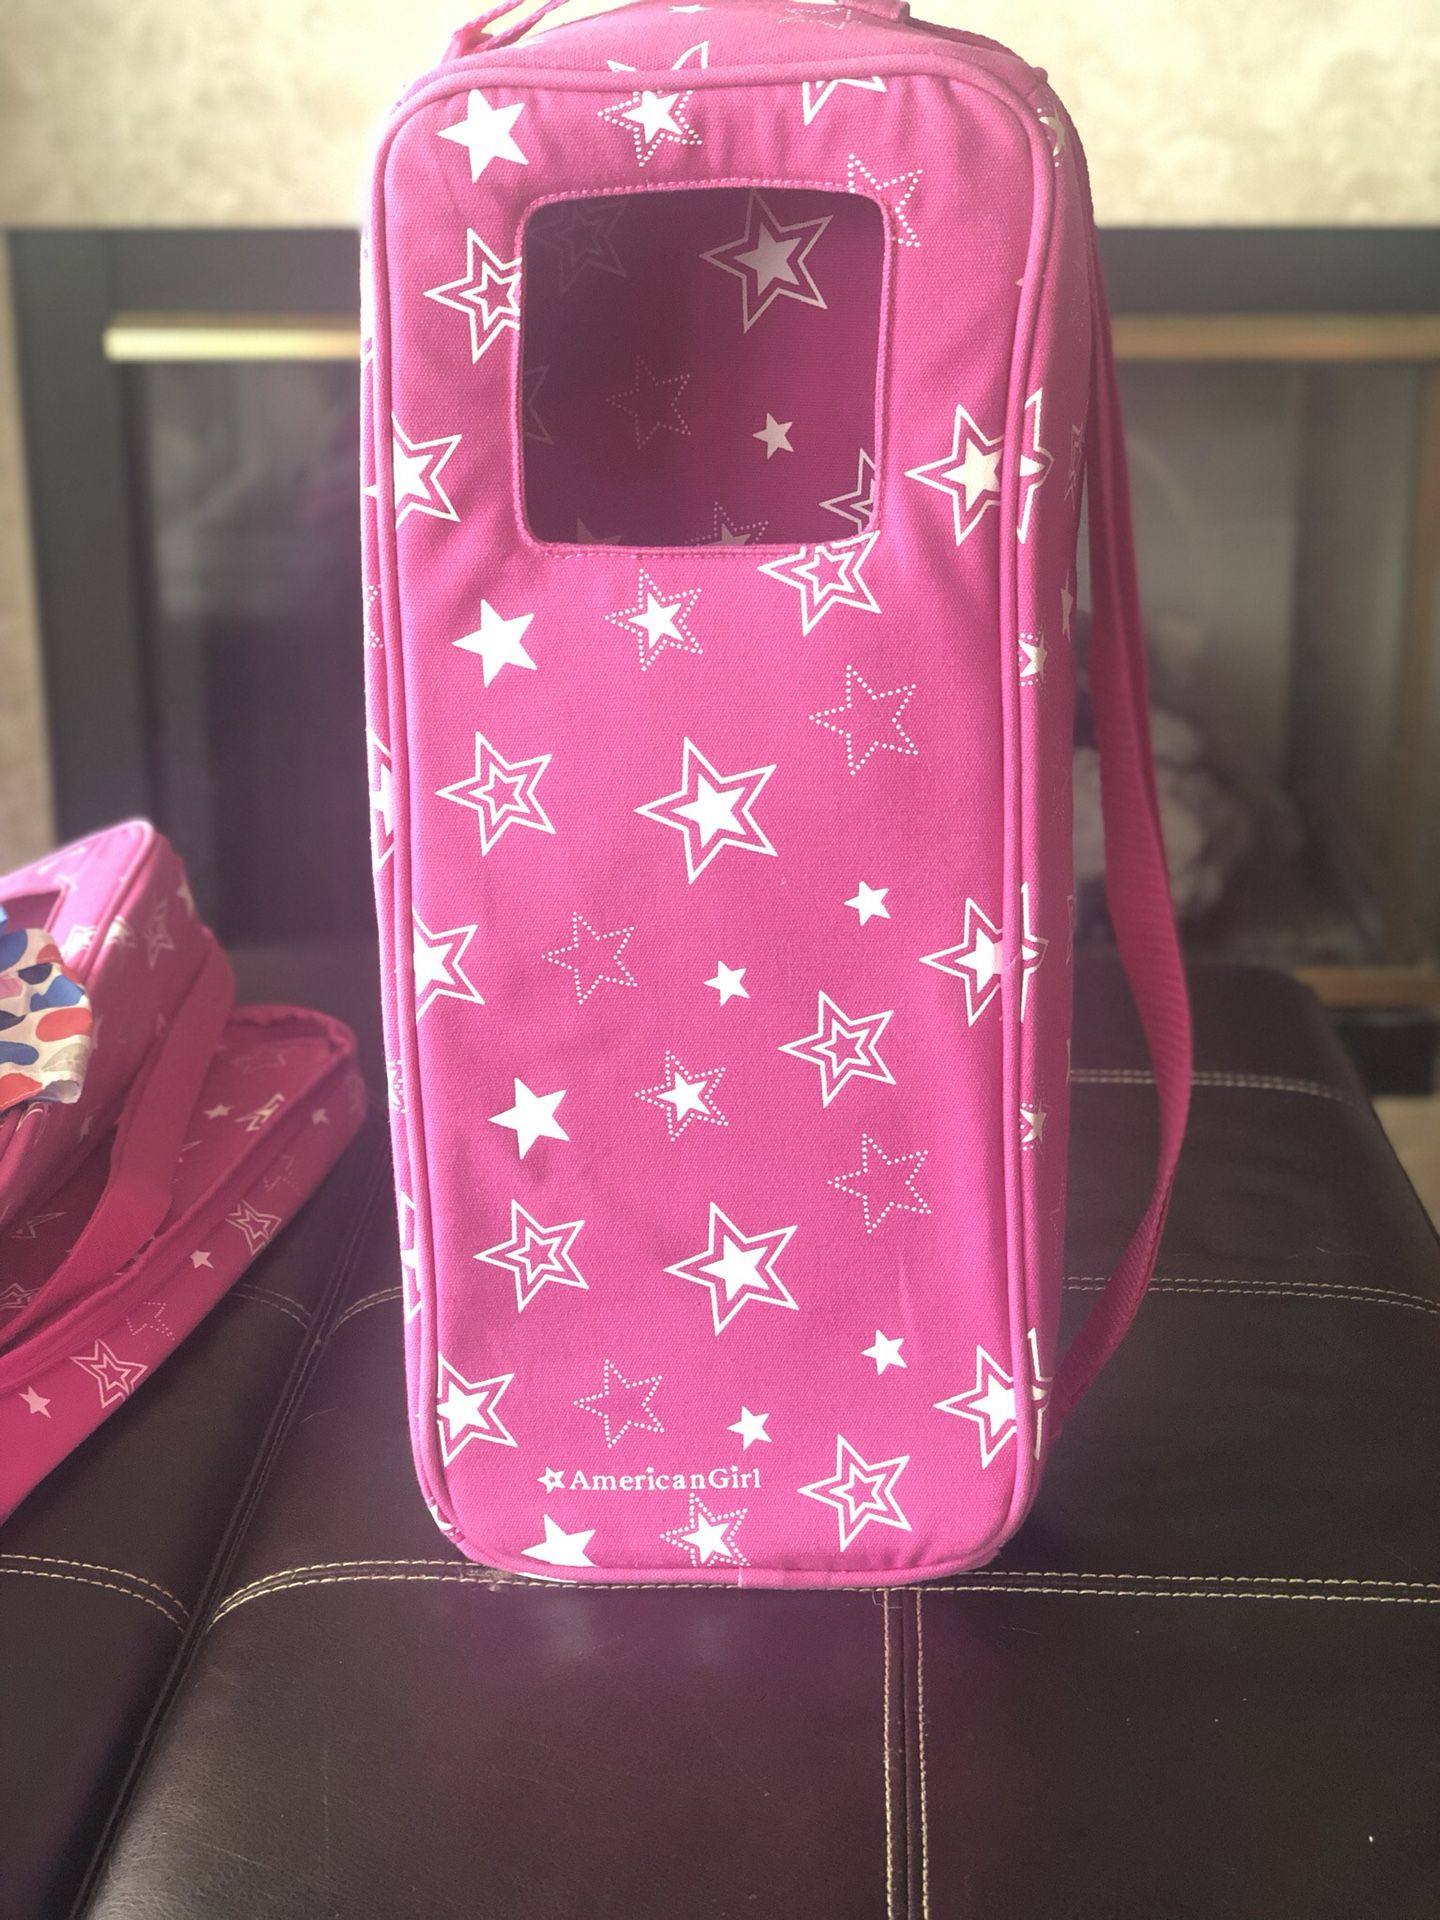 American Girl Doll Carrier Pink Star Travel Tote Soft Carrying Case, Retired